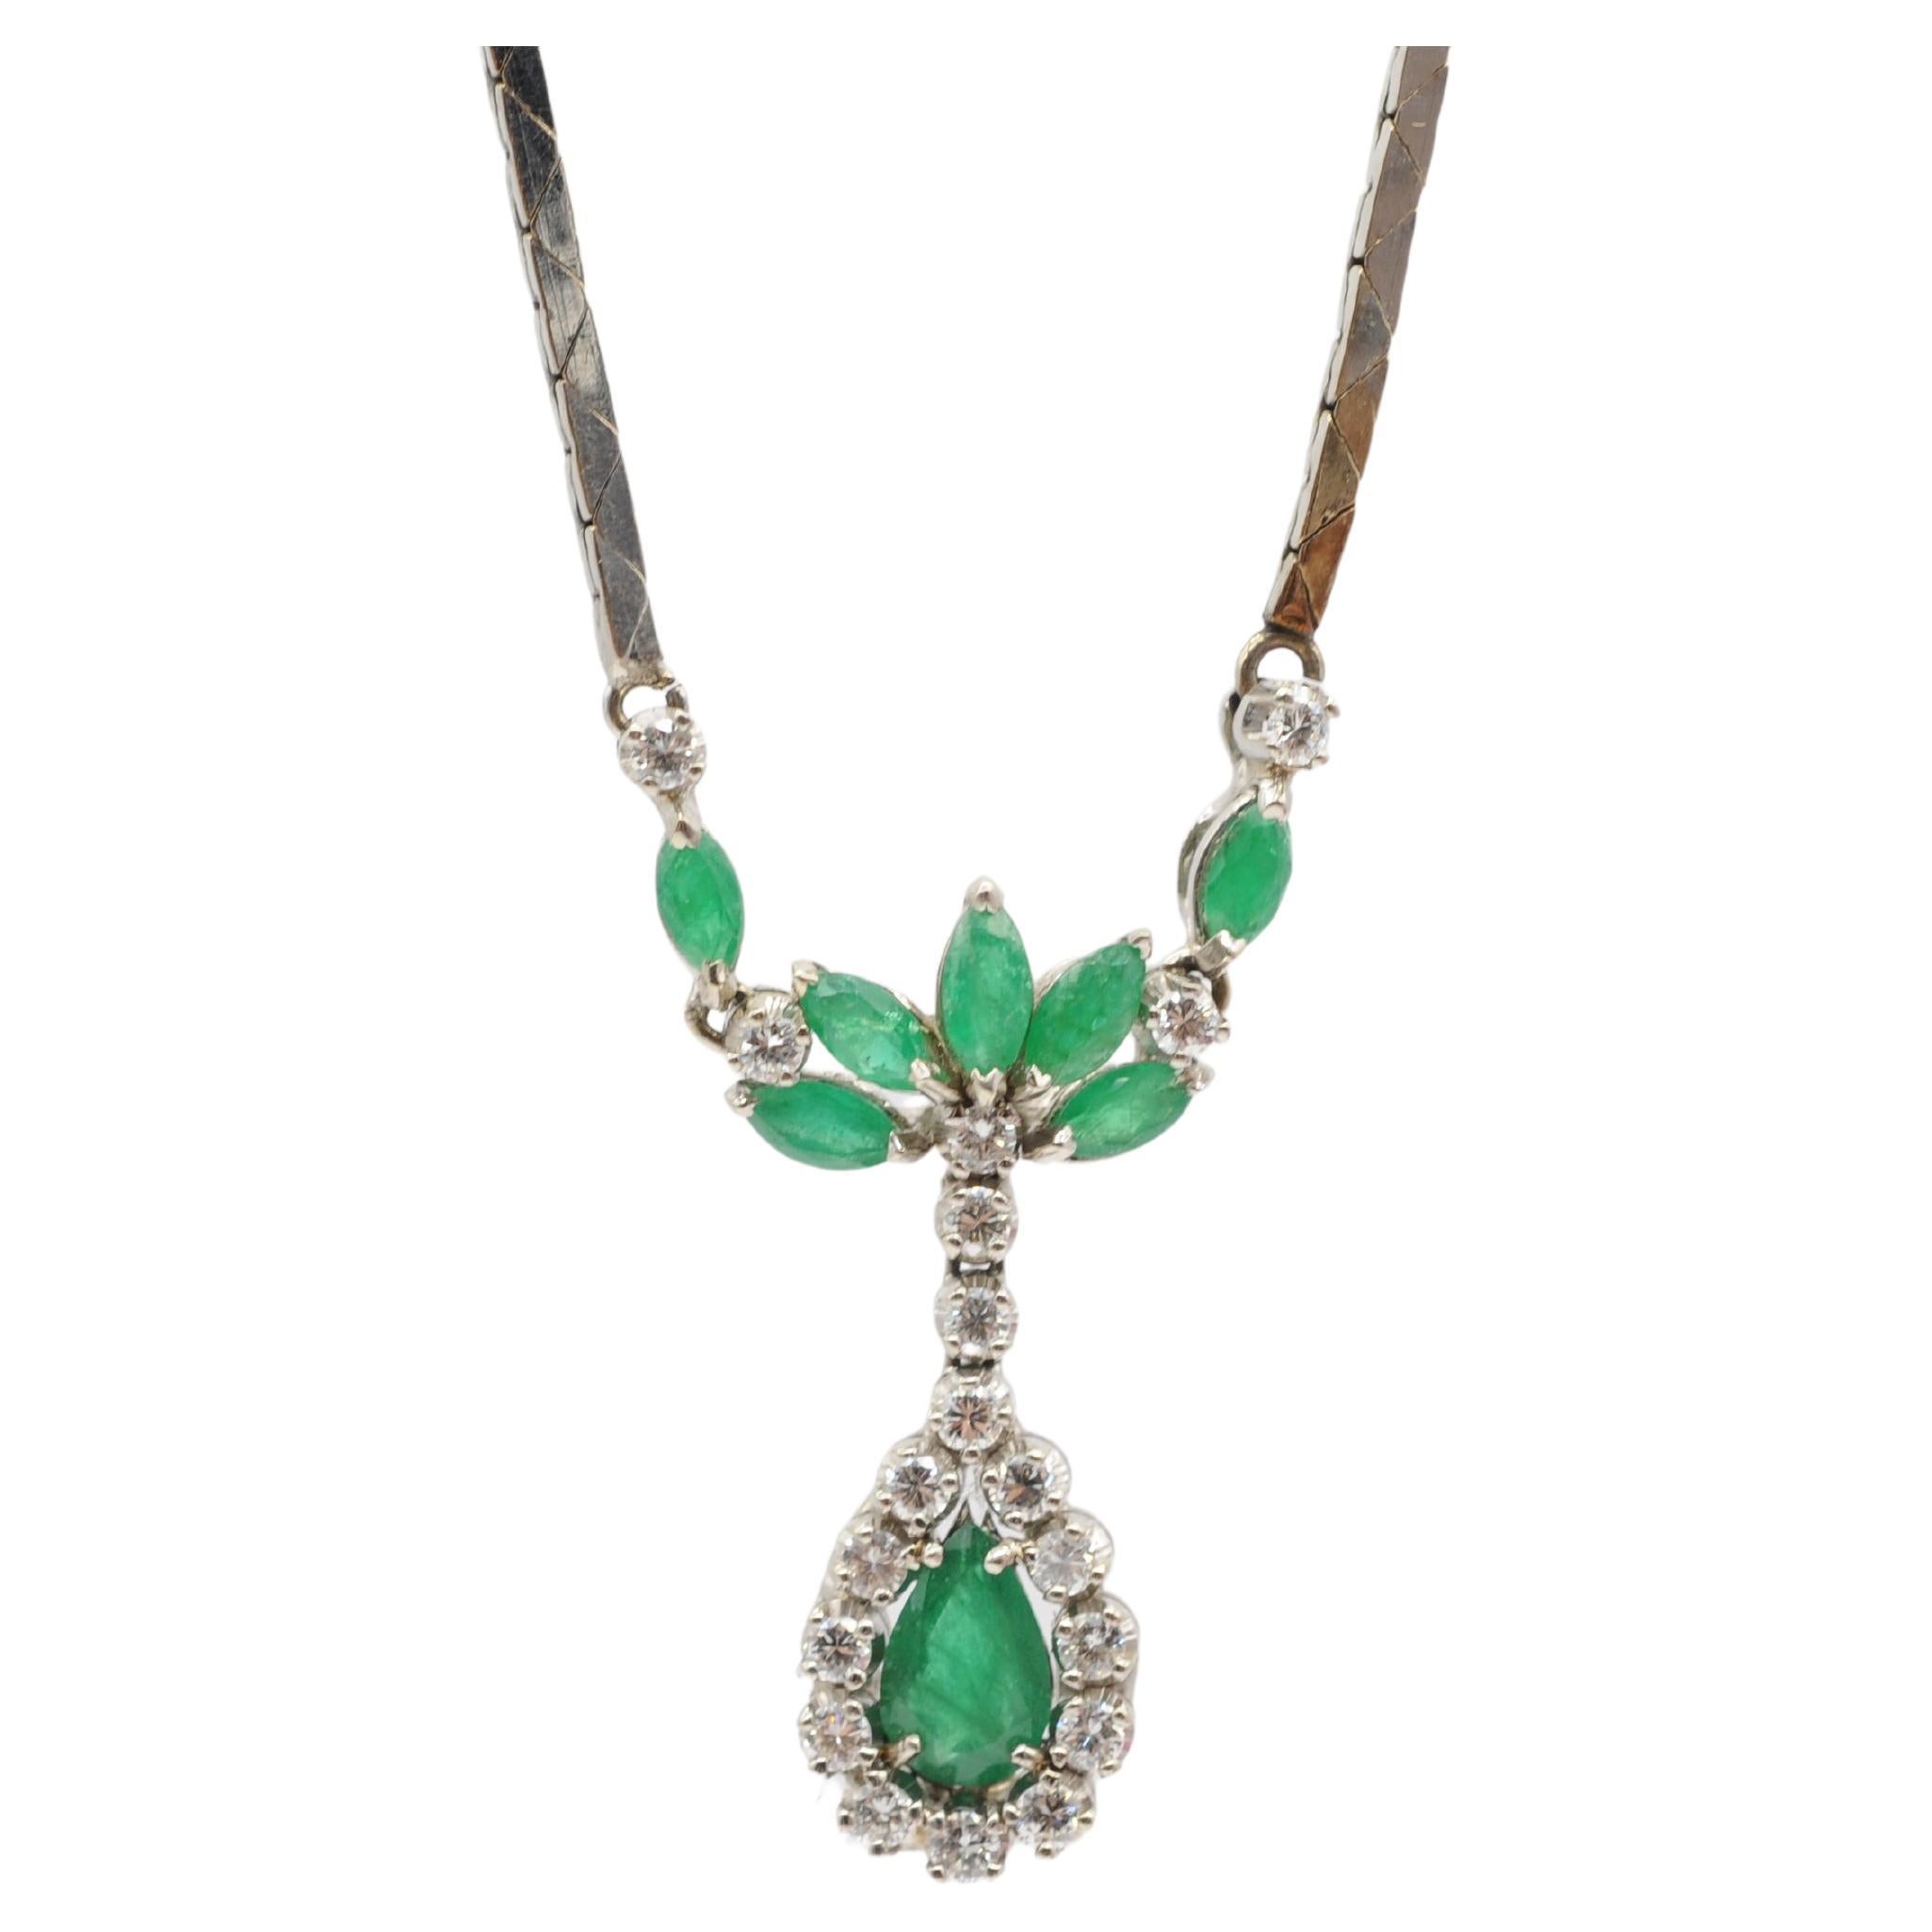 Wonderful Art deco style dreamfull necklace with emeralds and diamonds